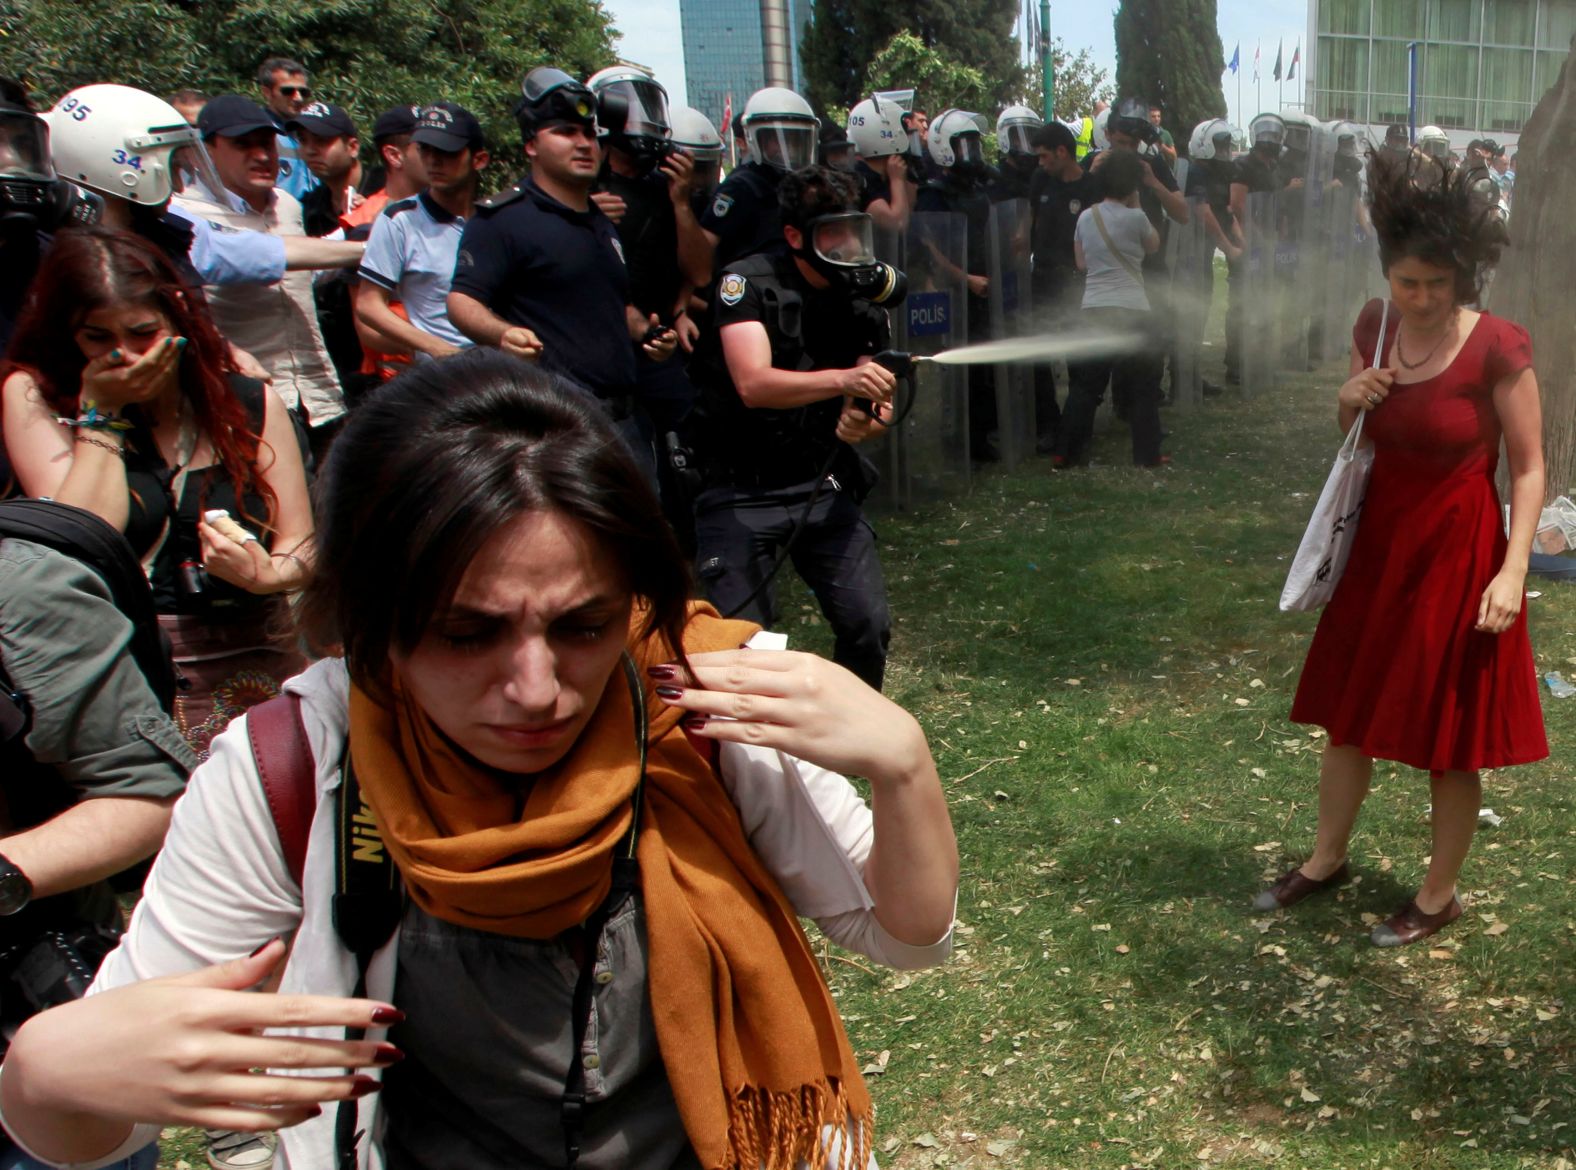 A Turkish police officer uses tear gas in May 2013 as people protested the government's plans to demolish Istanbul's Gezi Park. <a href="https://www.cnn.com/2013/06/14/world/europe/turkey-protests/index.html" target="_blank">Protests evolved into anti-government dissent</a> across the nation.